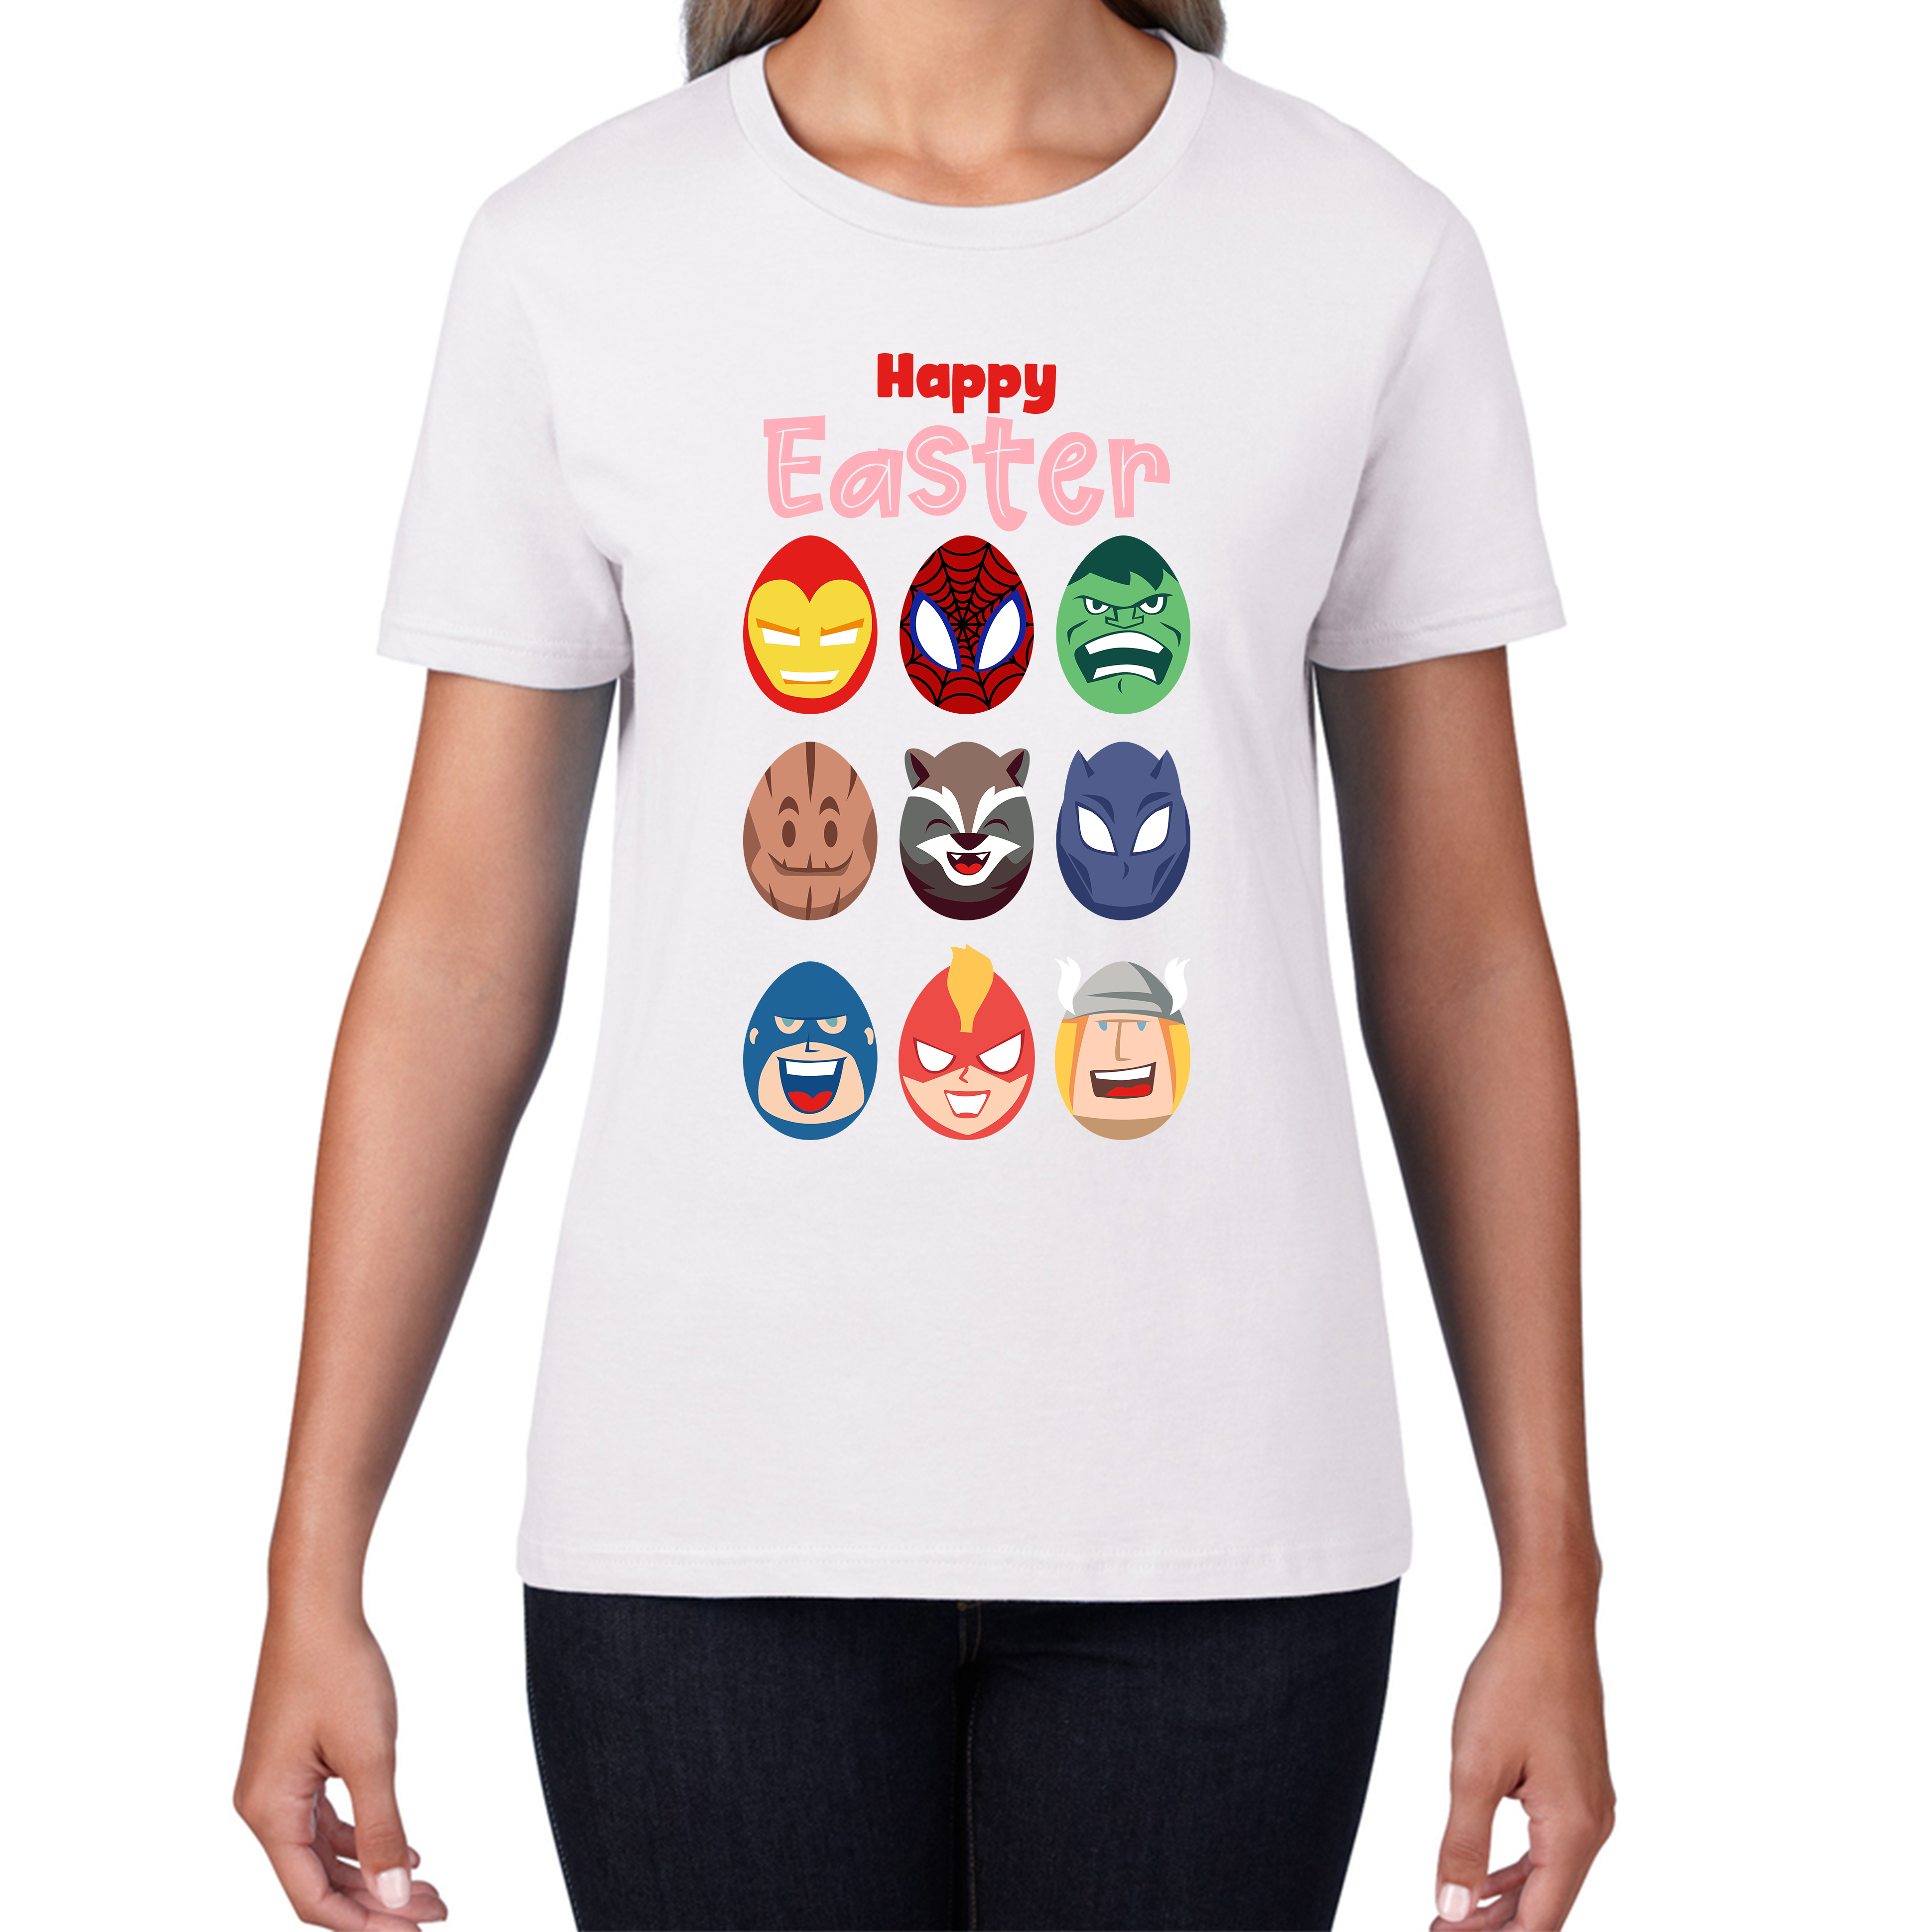 Happy Easter Marvel Avengers Characters Face Avengers Characters Easter Day Happy Easter Cute Superhero Womens Tee Top